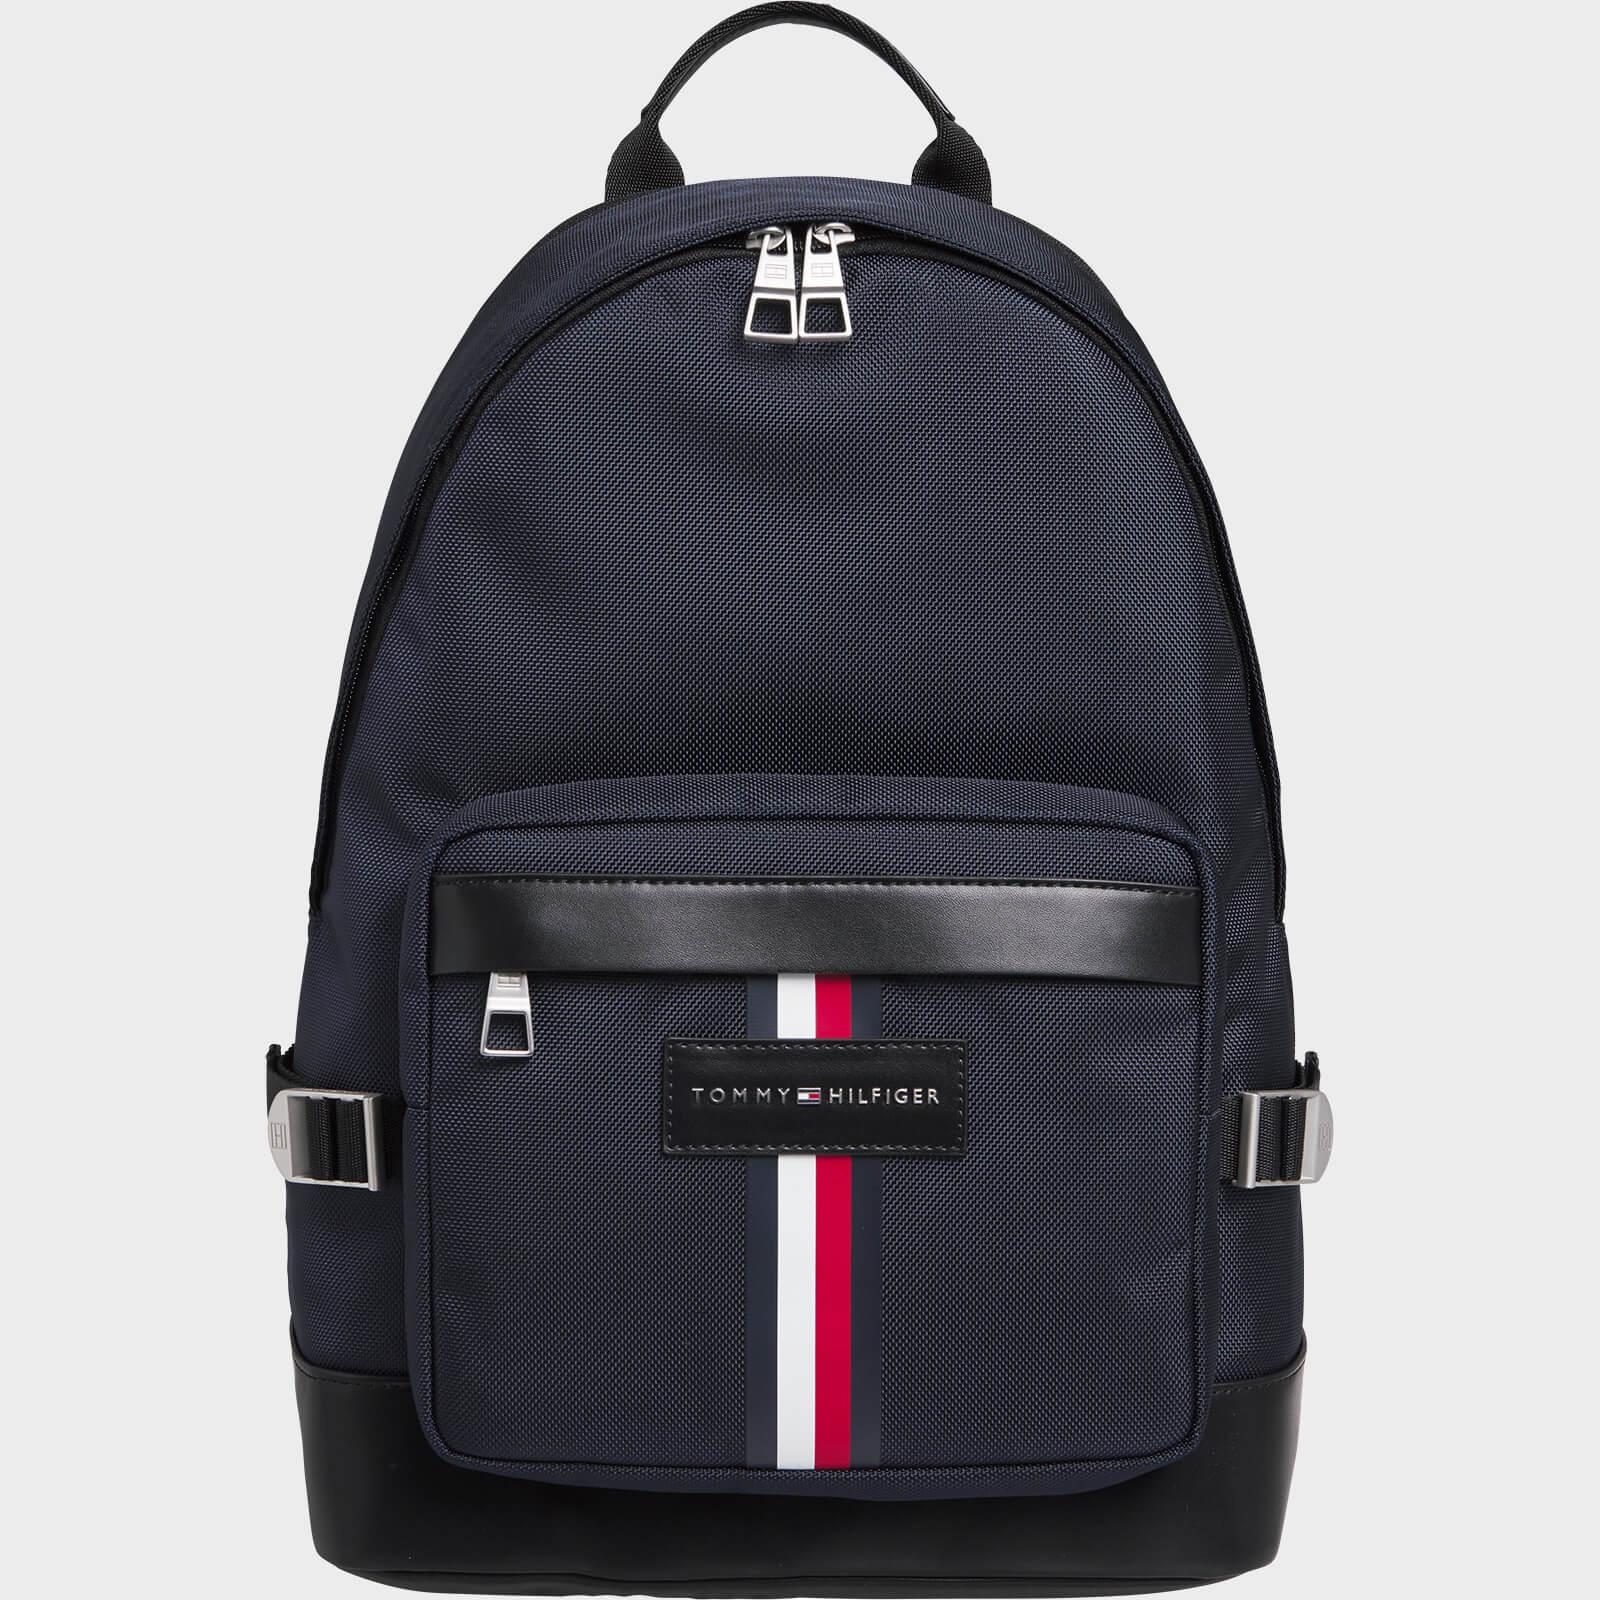 Tommy Hilfiger Synthetic Uptown Nylon Backpack in Blue for Men - Lyst